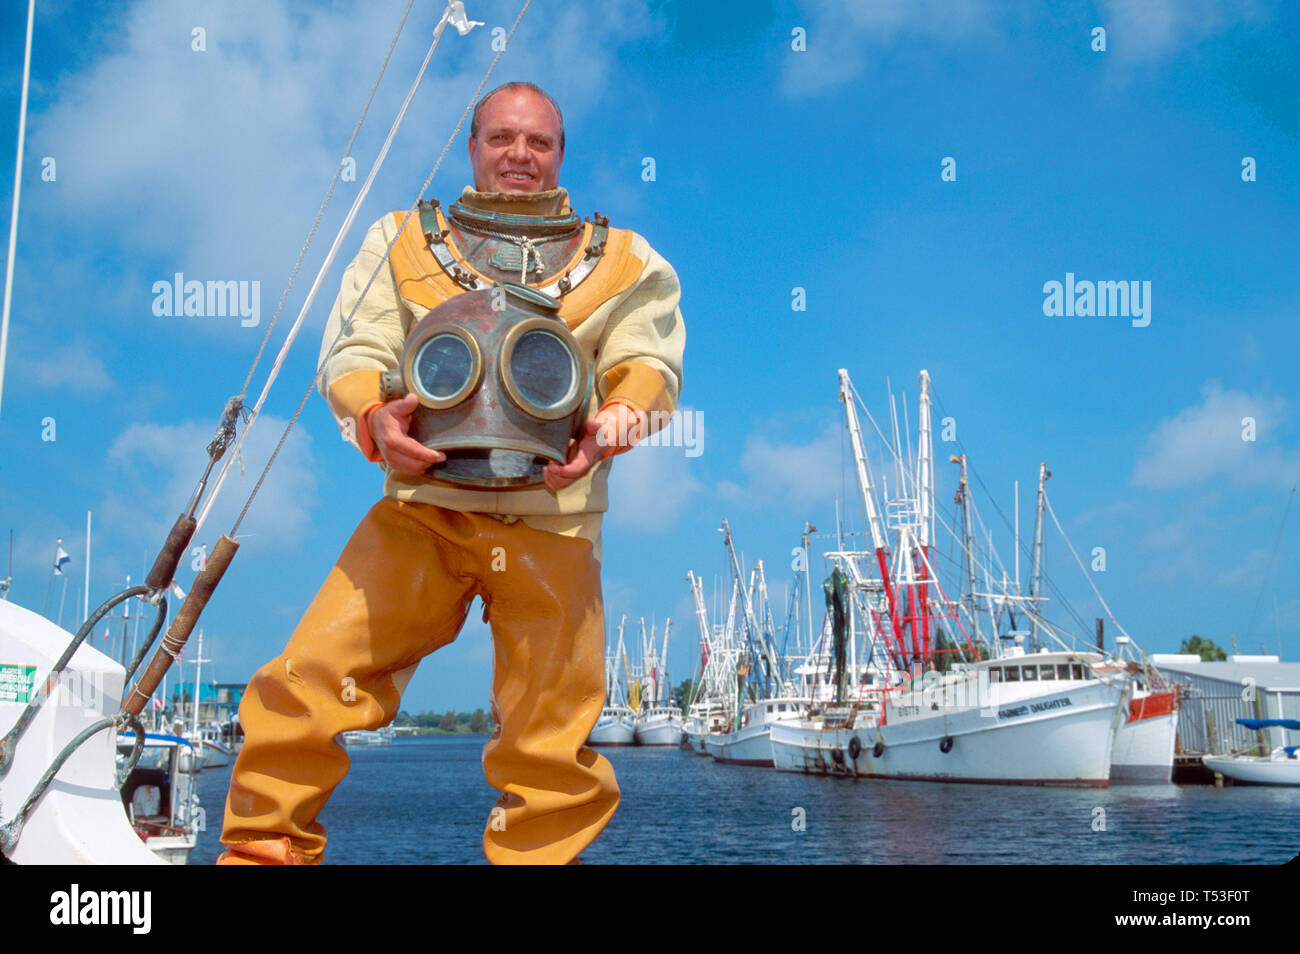 Florida Pinellas County,Tarpon Springs,Anclote River Greek commercial sponge diver wearing canvas coffin diving suit,FL278 Stock Photo